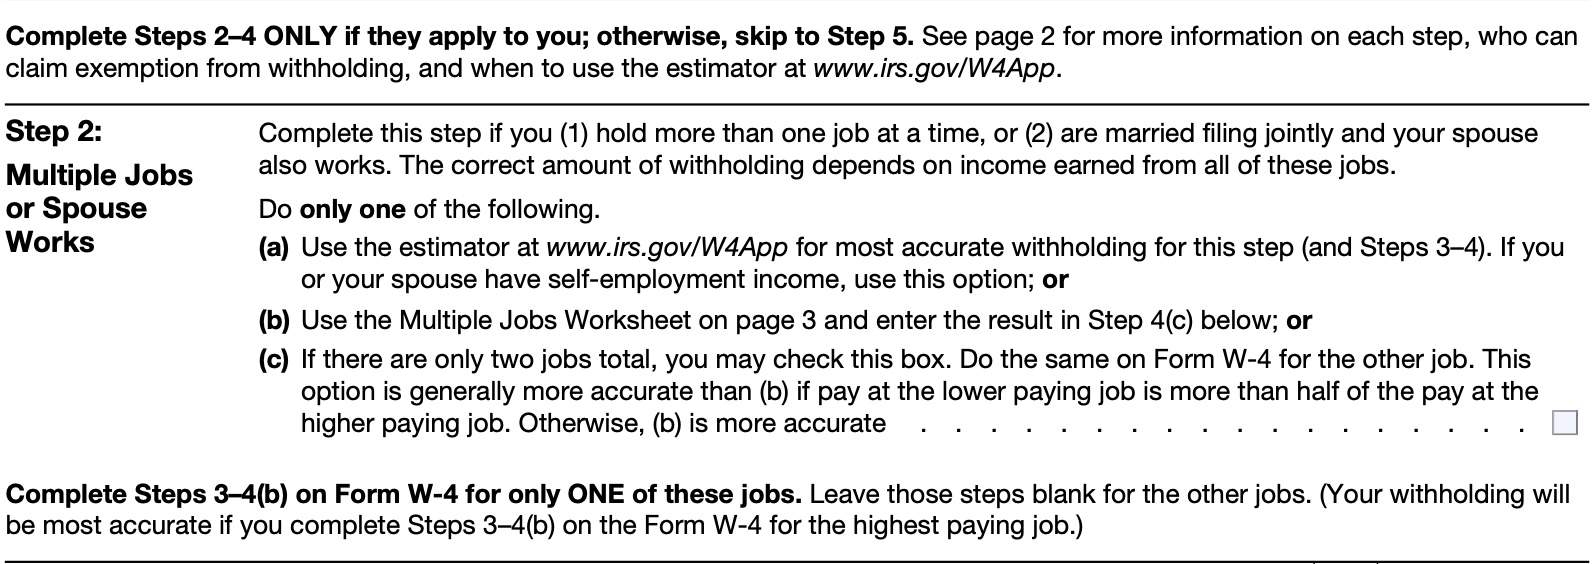 step 2: multiple jobs or spouse works